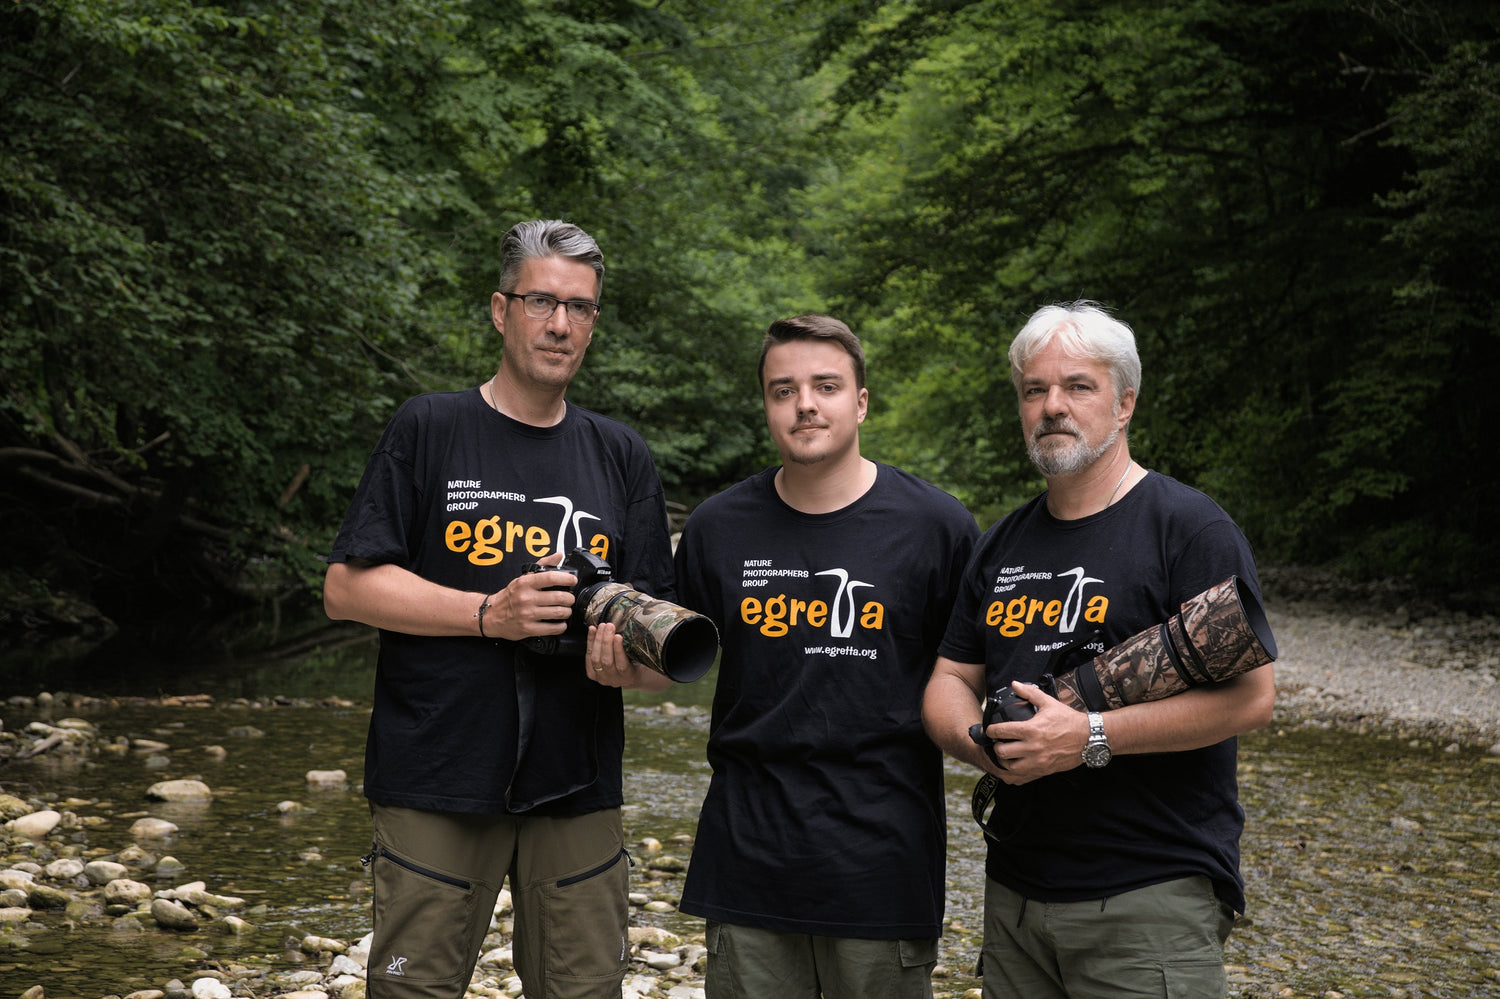 A team photo of the Egretta members in the forest next to a stream. Professional photographers group, high-tech camera.